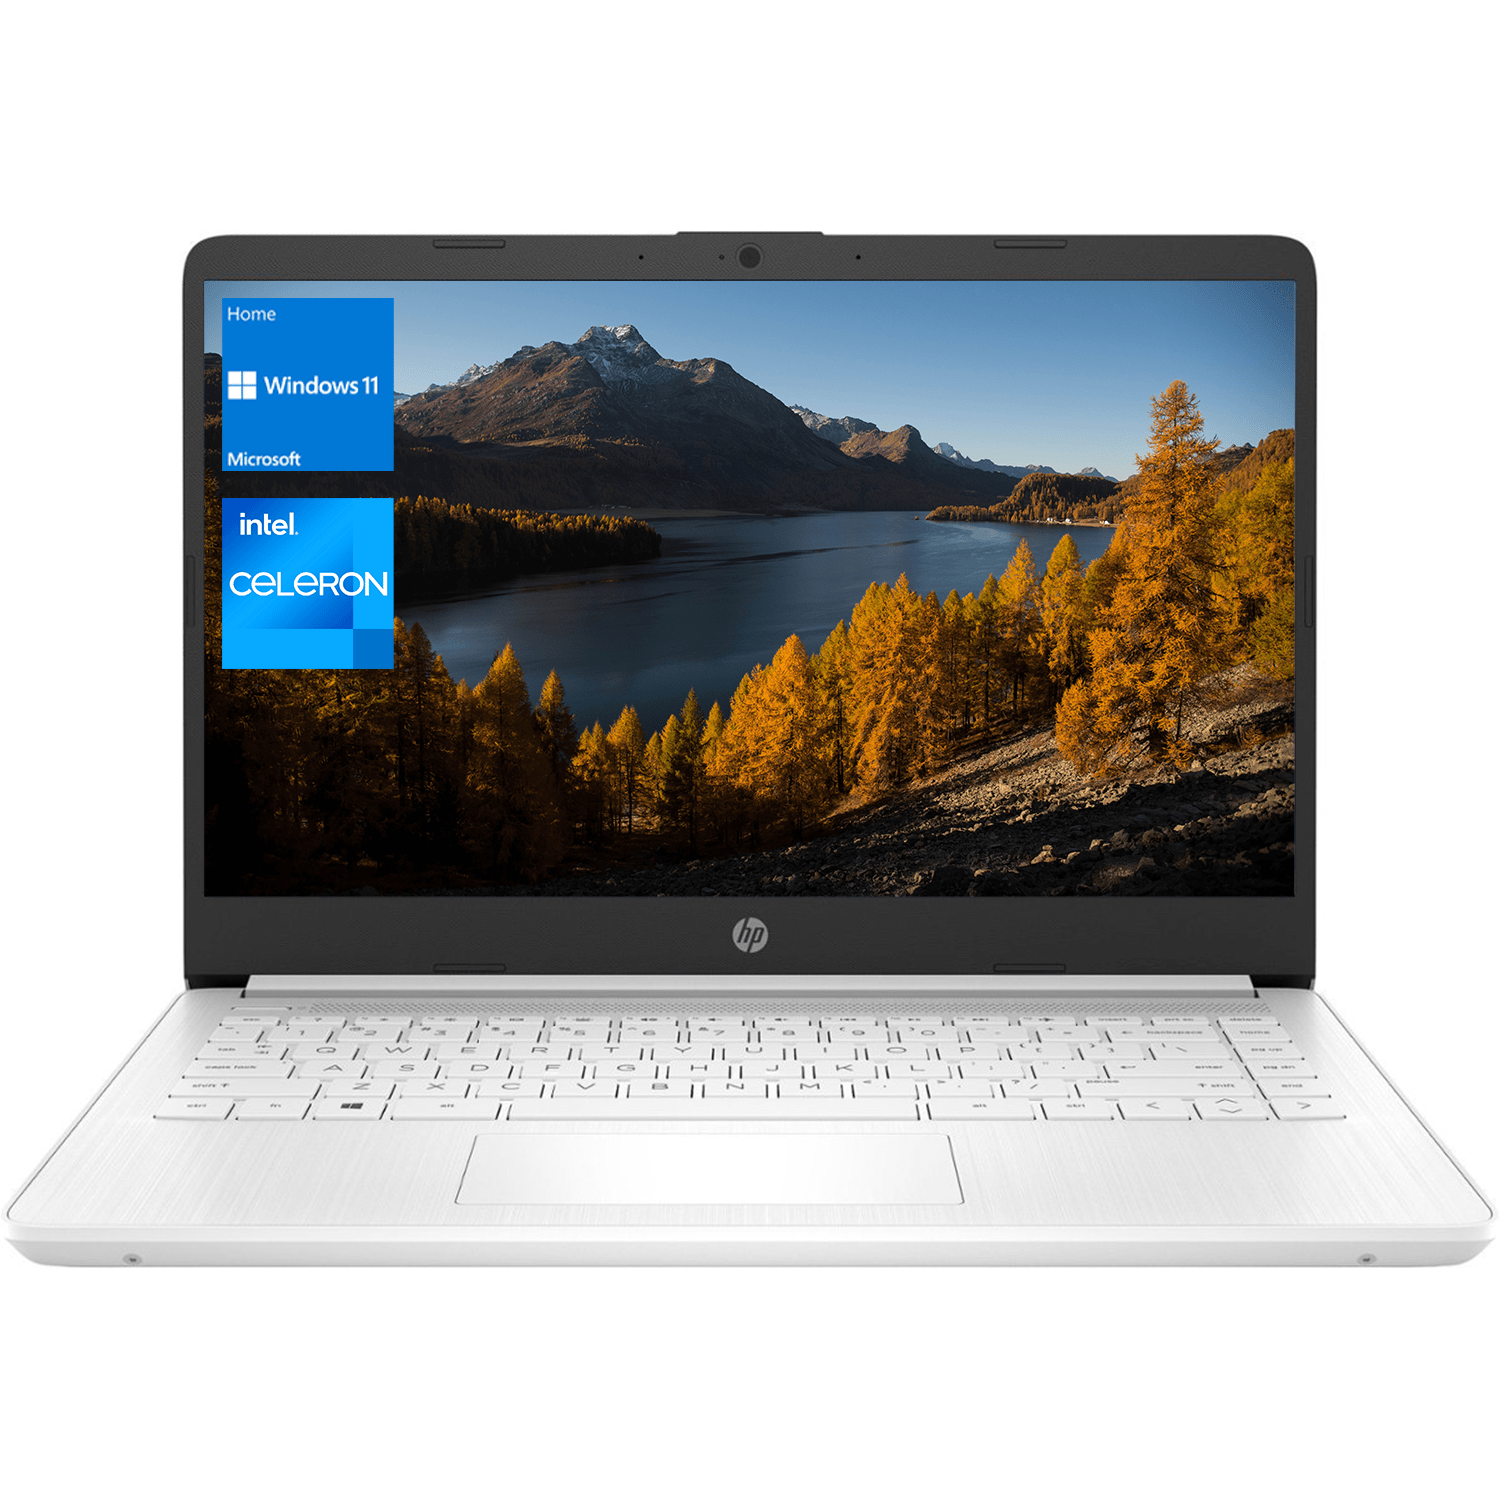 

Hp Portable Laptop, Student And Business, 14" Hd Display, Intel Quad-core N4120, 4gb Ddr4 Ram, 64gb Emmc, 1 Year Office 365, Webcam, Sd Card Reader, Wi-fi, Windows 11 Home, White